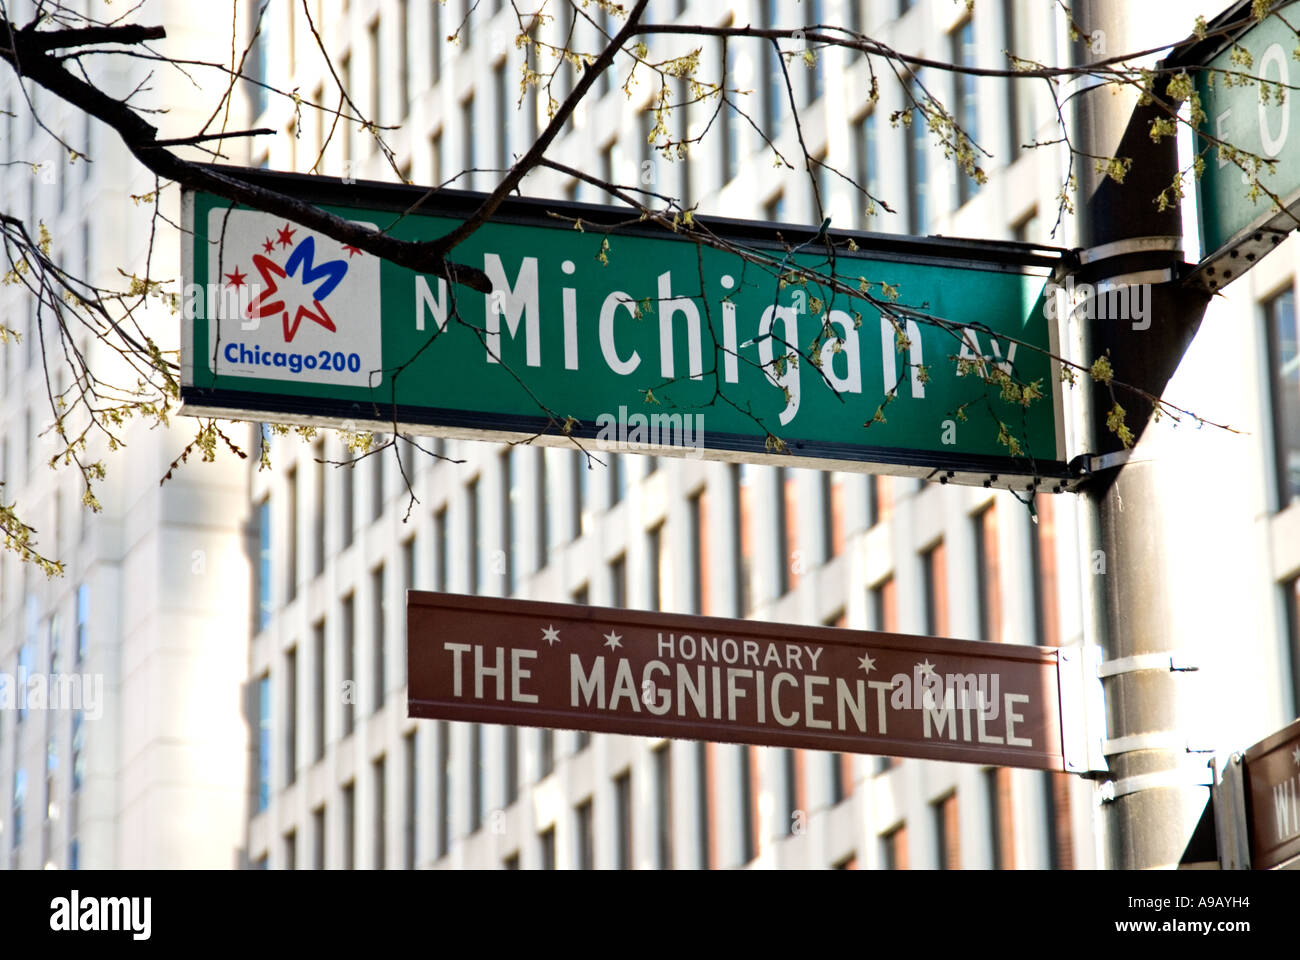 Chicago Michigan Avenue Street Sign / The Magnificent Mile (Upscale retail stores along Michigan Ave.) Stock Photo